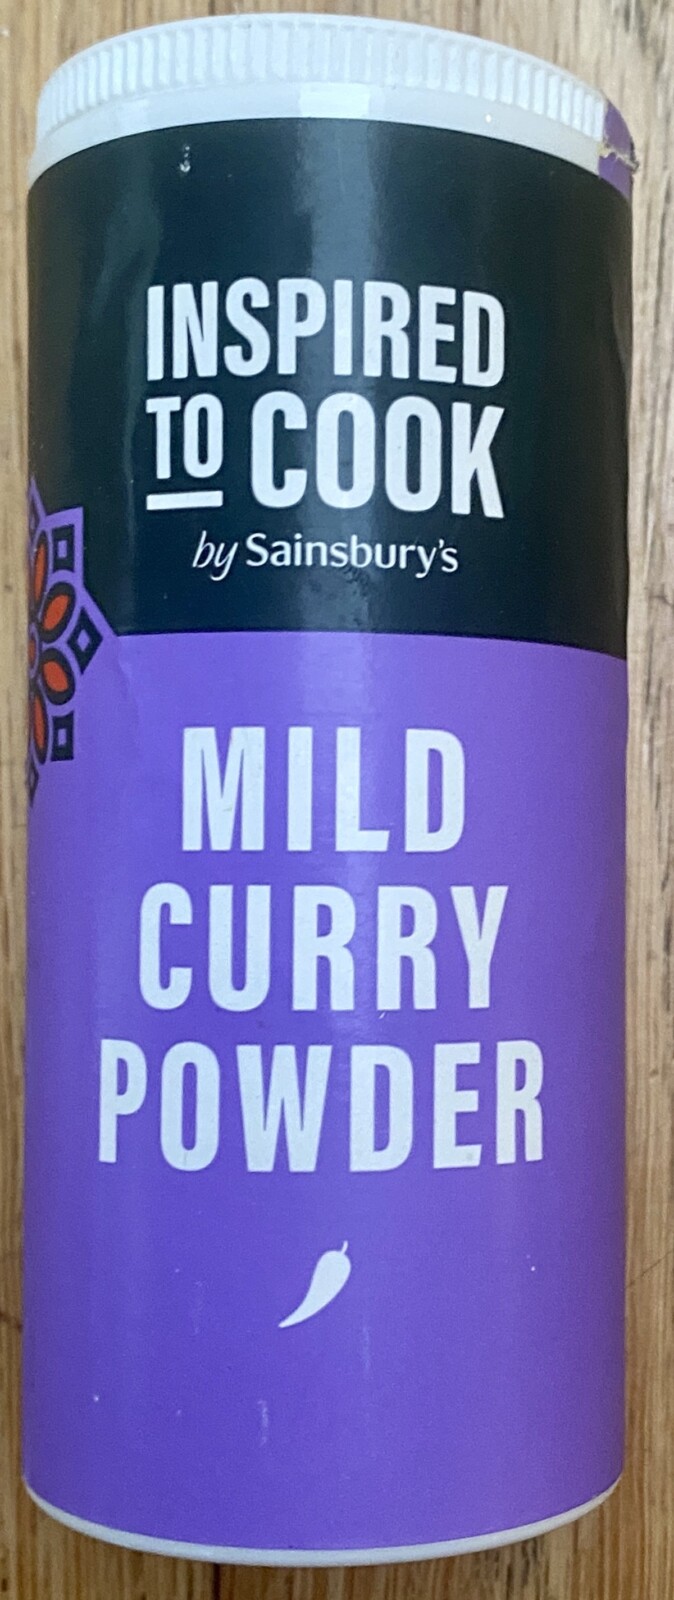 A tub of mild curry powder. The tub is coloured purple.